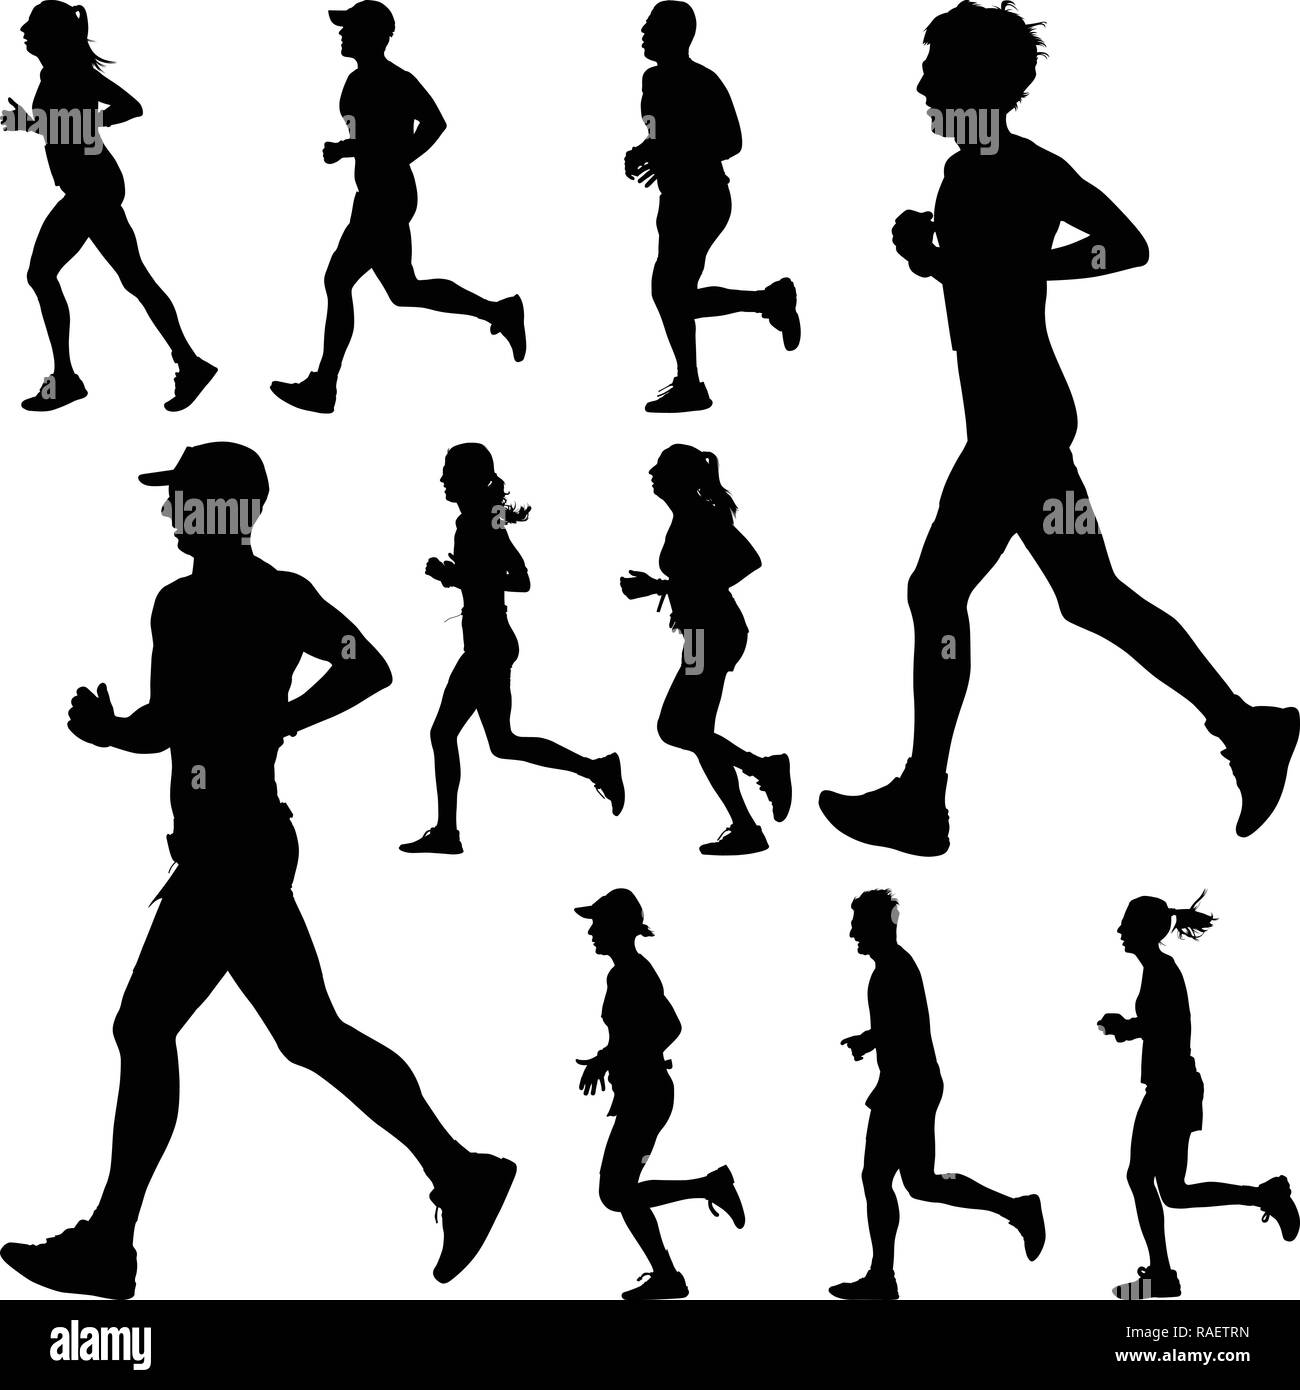 Group of runners Black and White Stock Photos & Images - Alamy